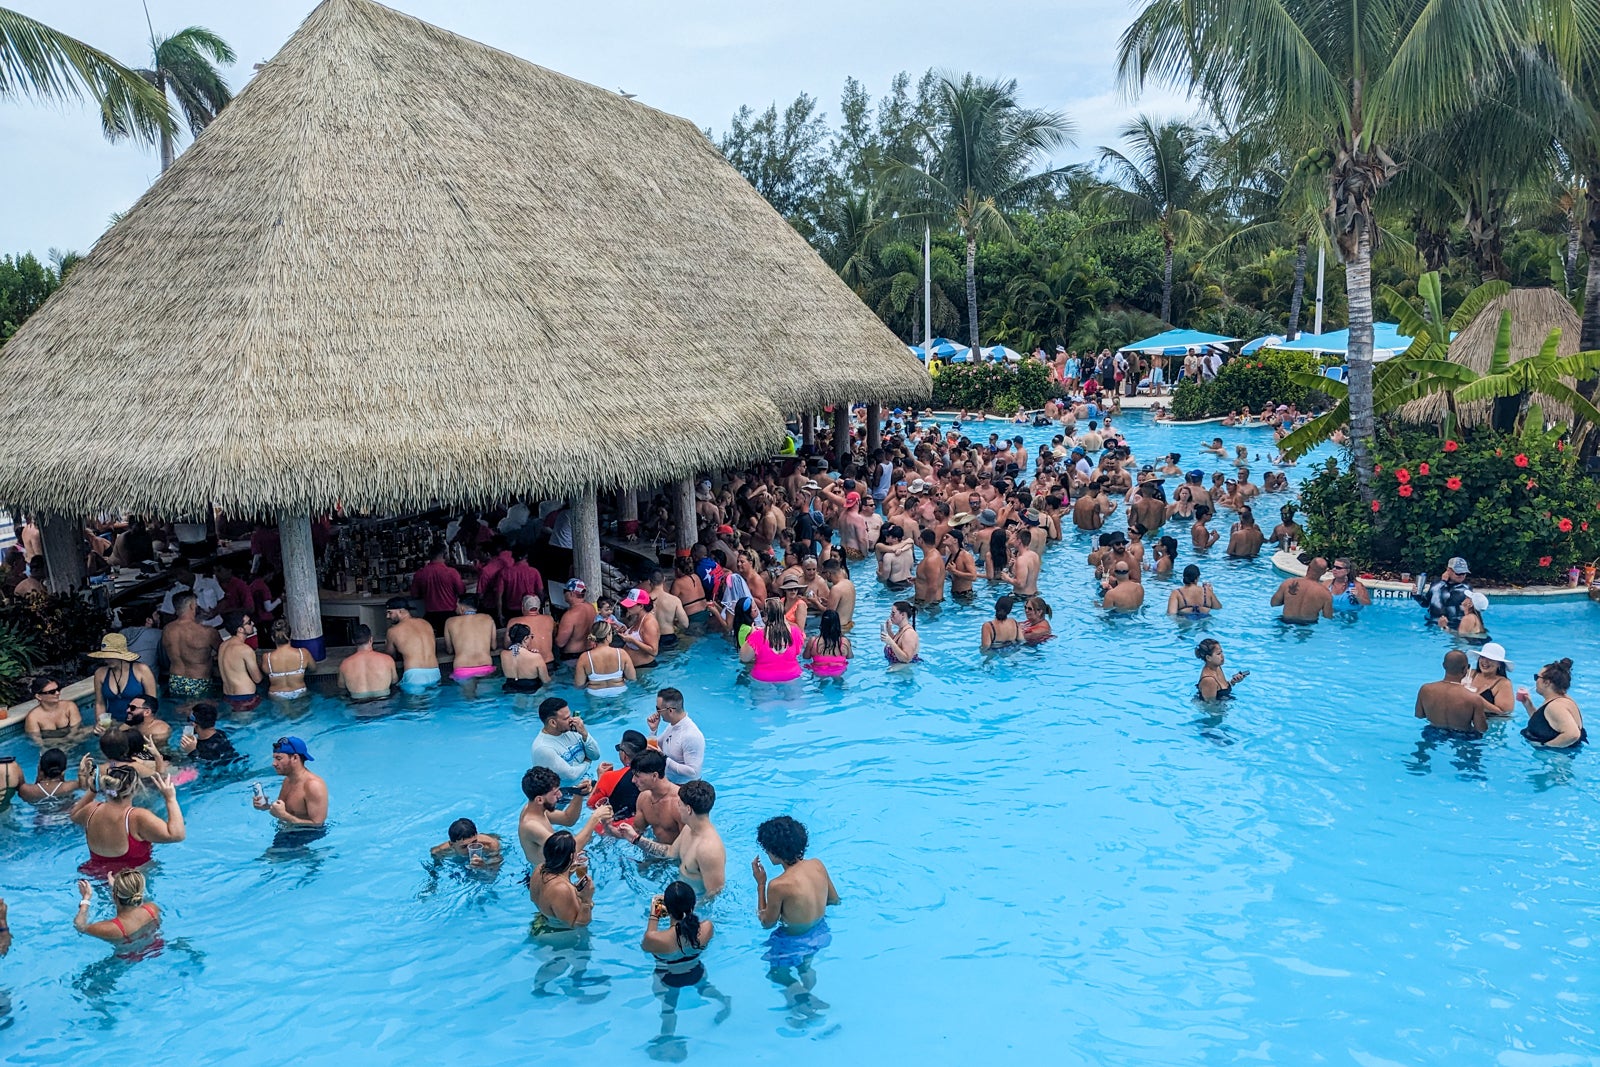 Swim-up bar with crowd of people 